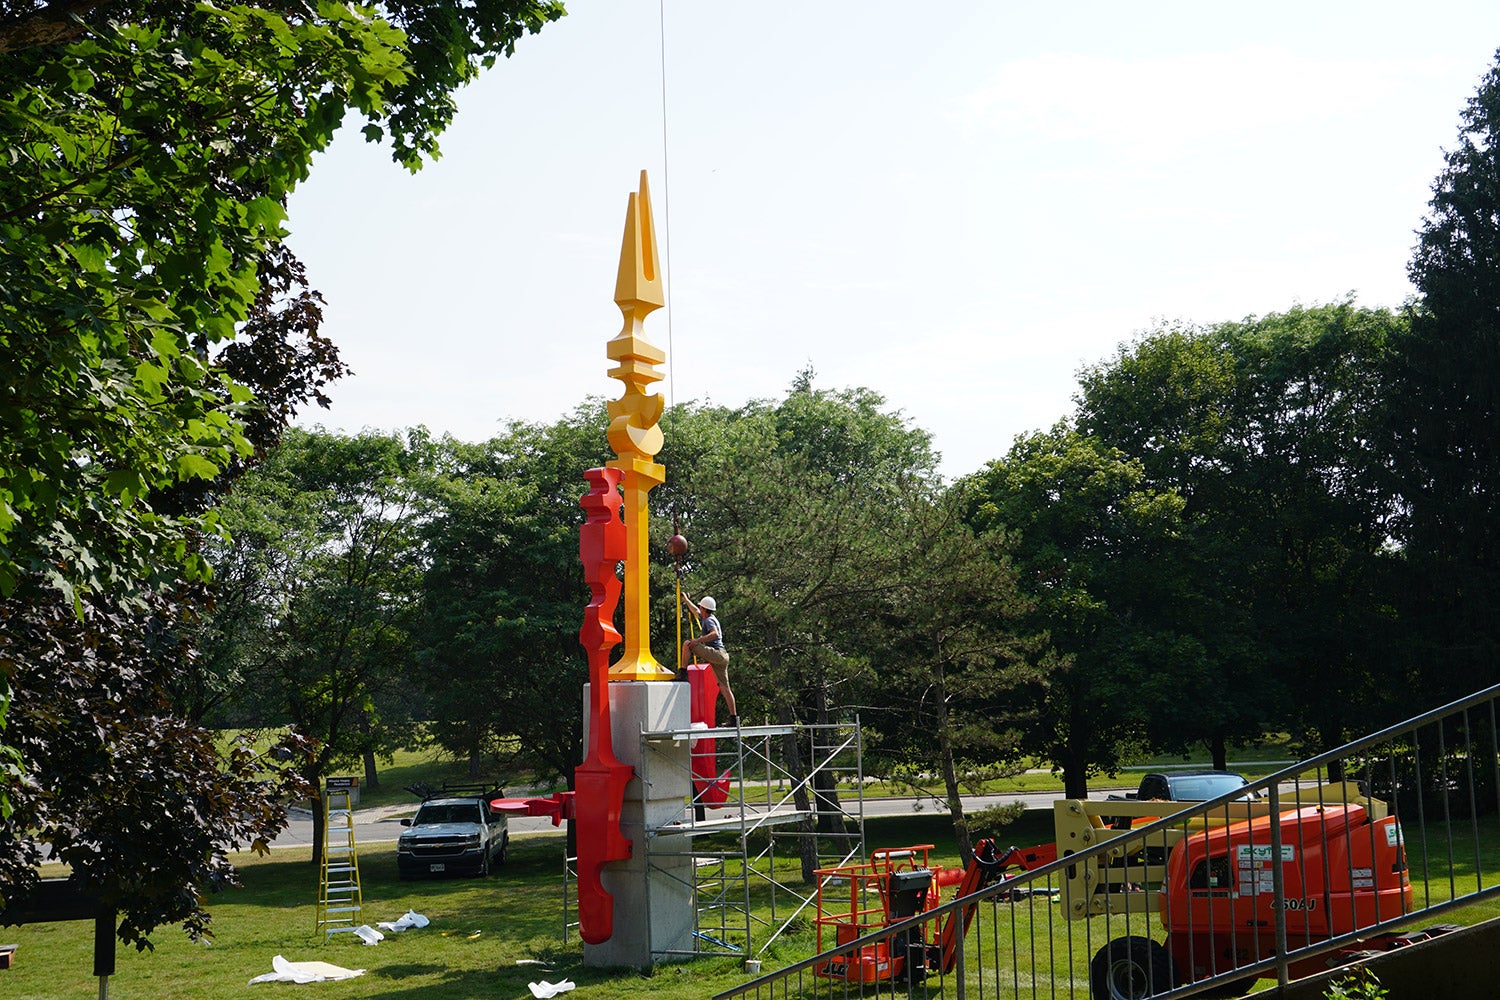 the sculptures being installed